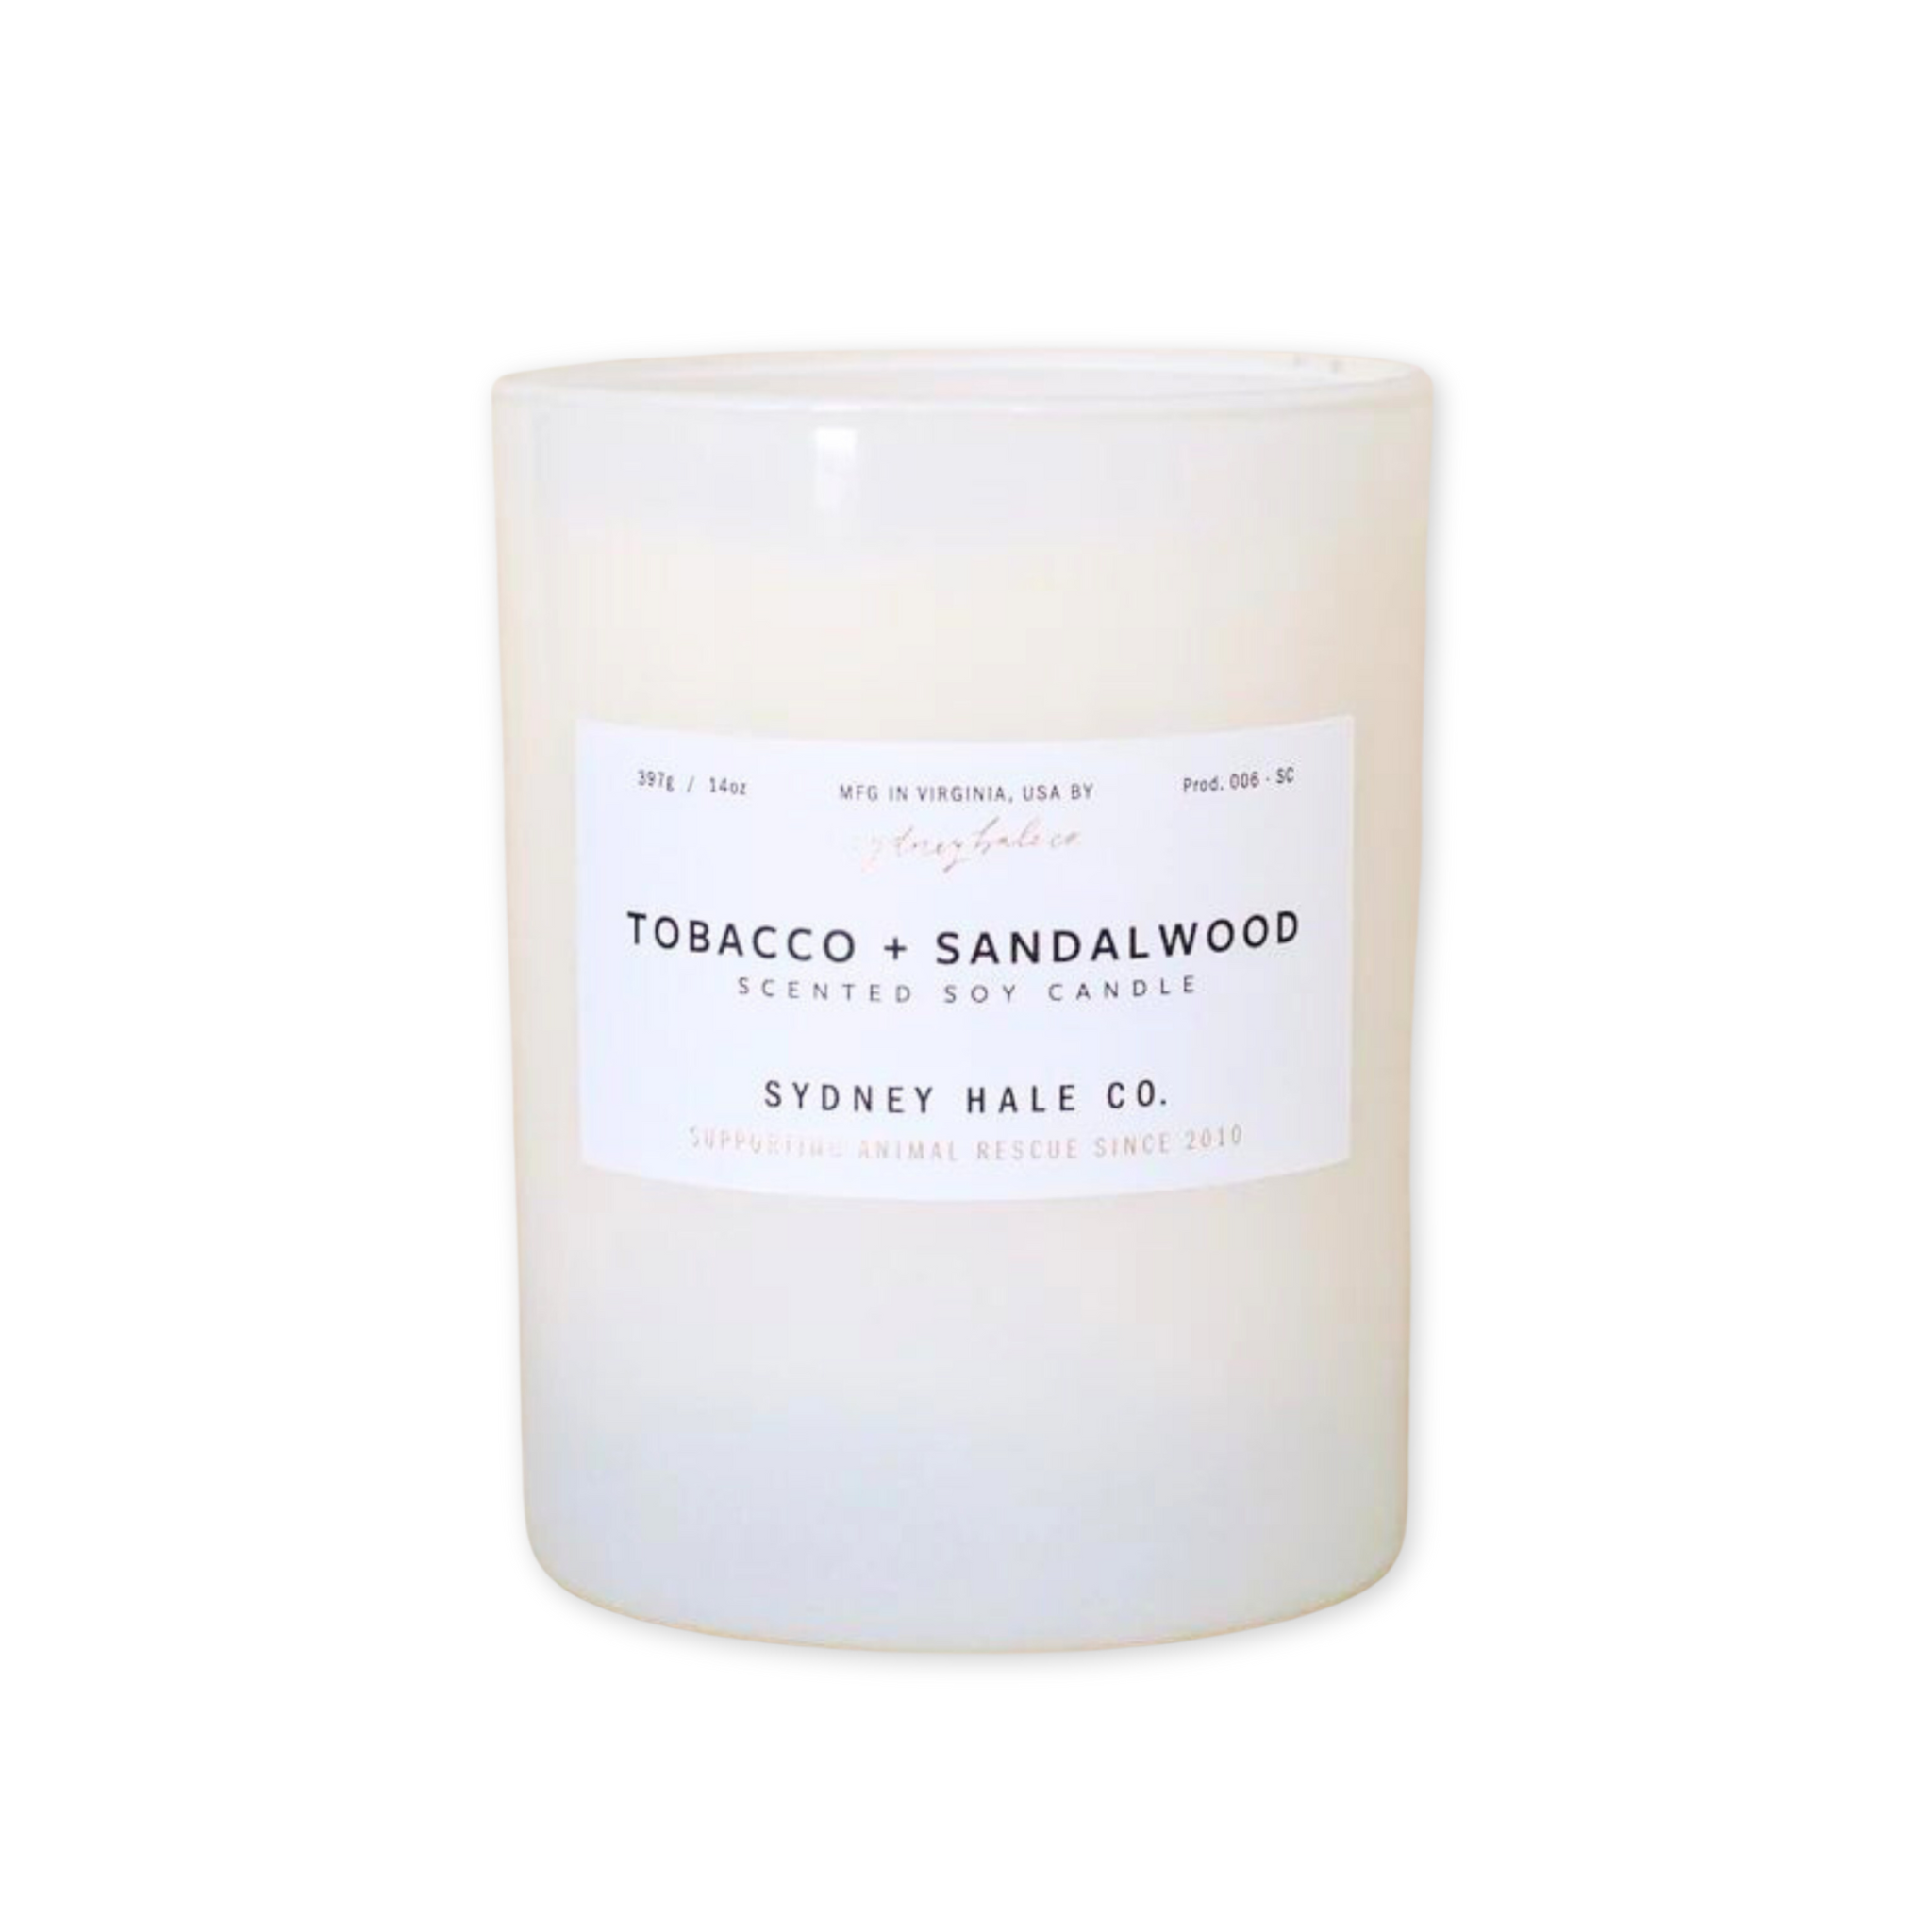 tobacco and sandalwood scented candle